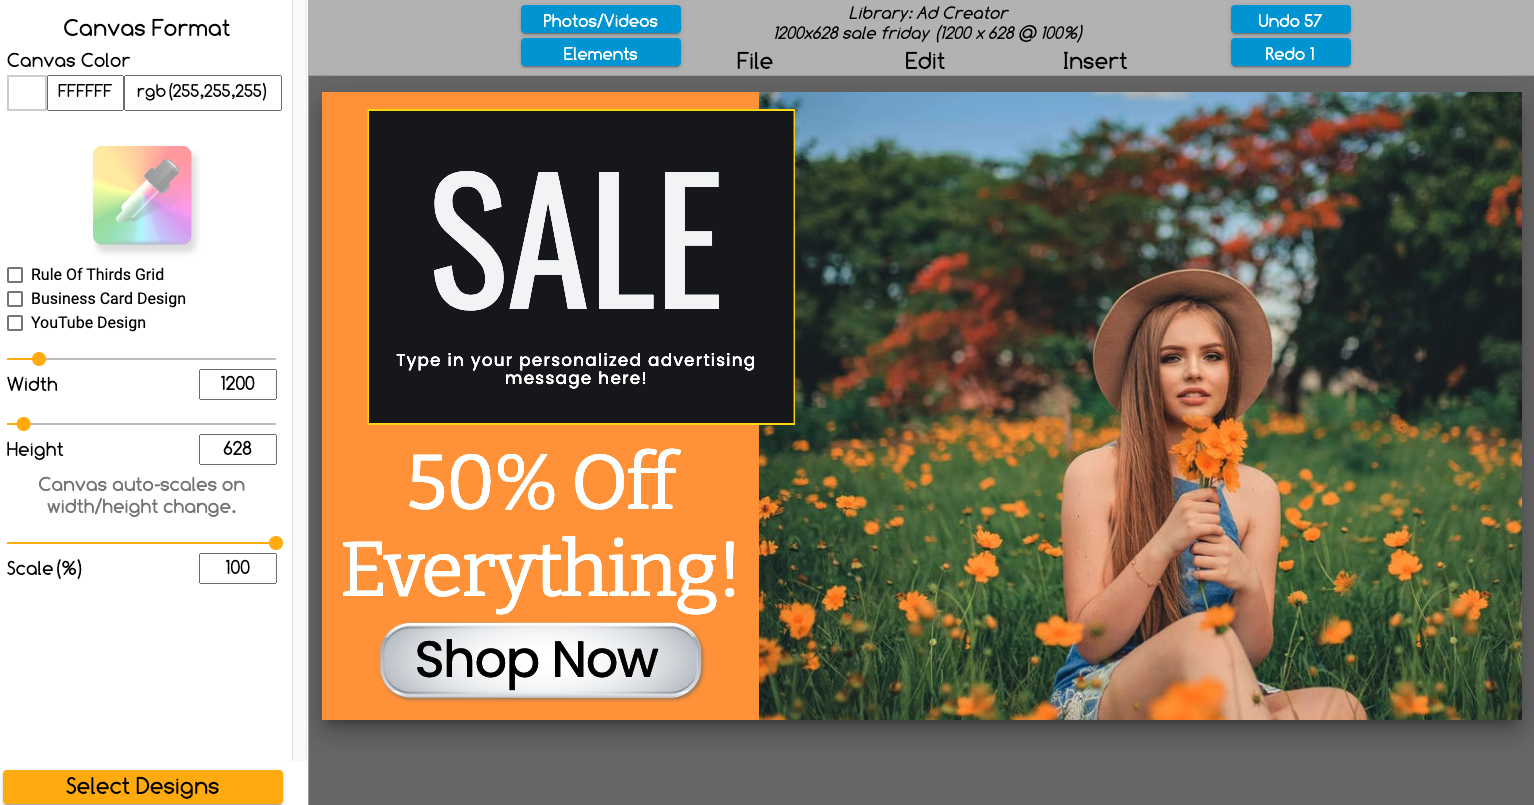 Ad design with woman sitting in field of orange flowers.